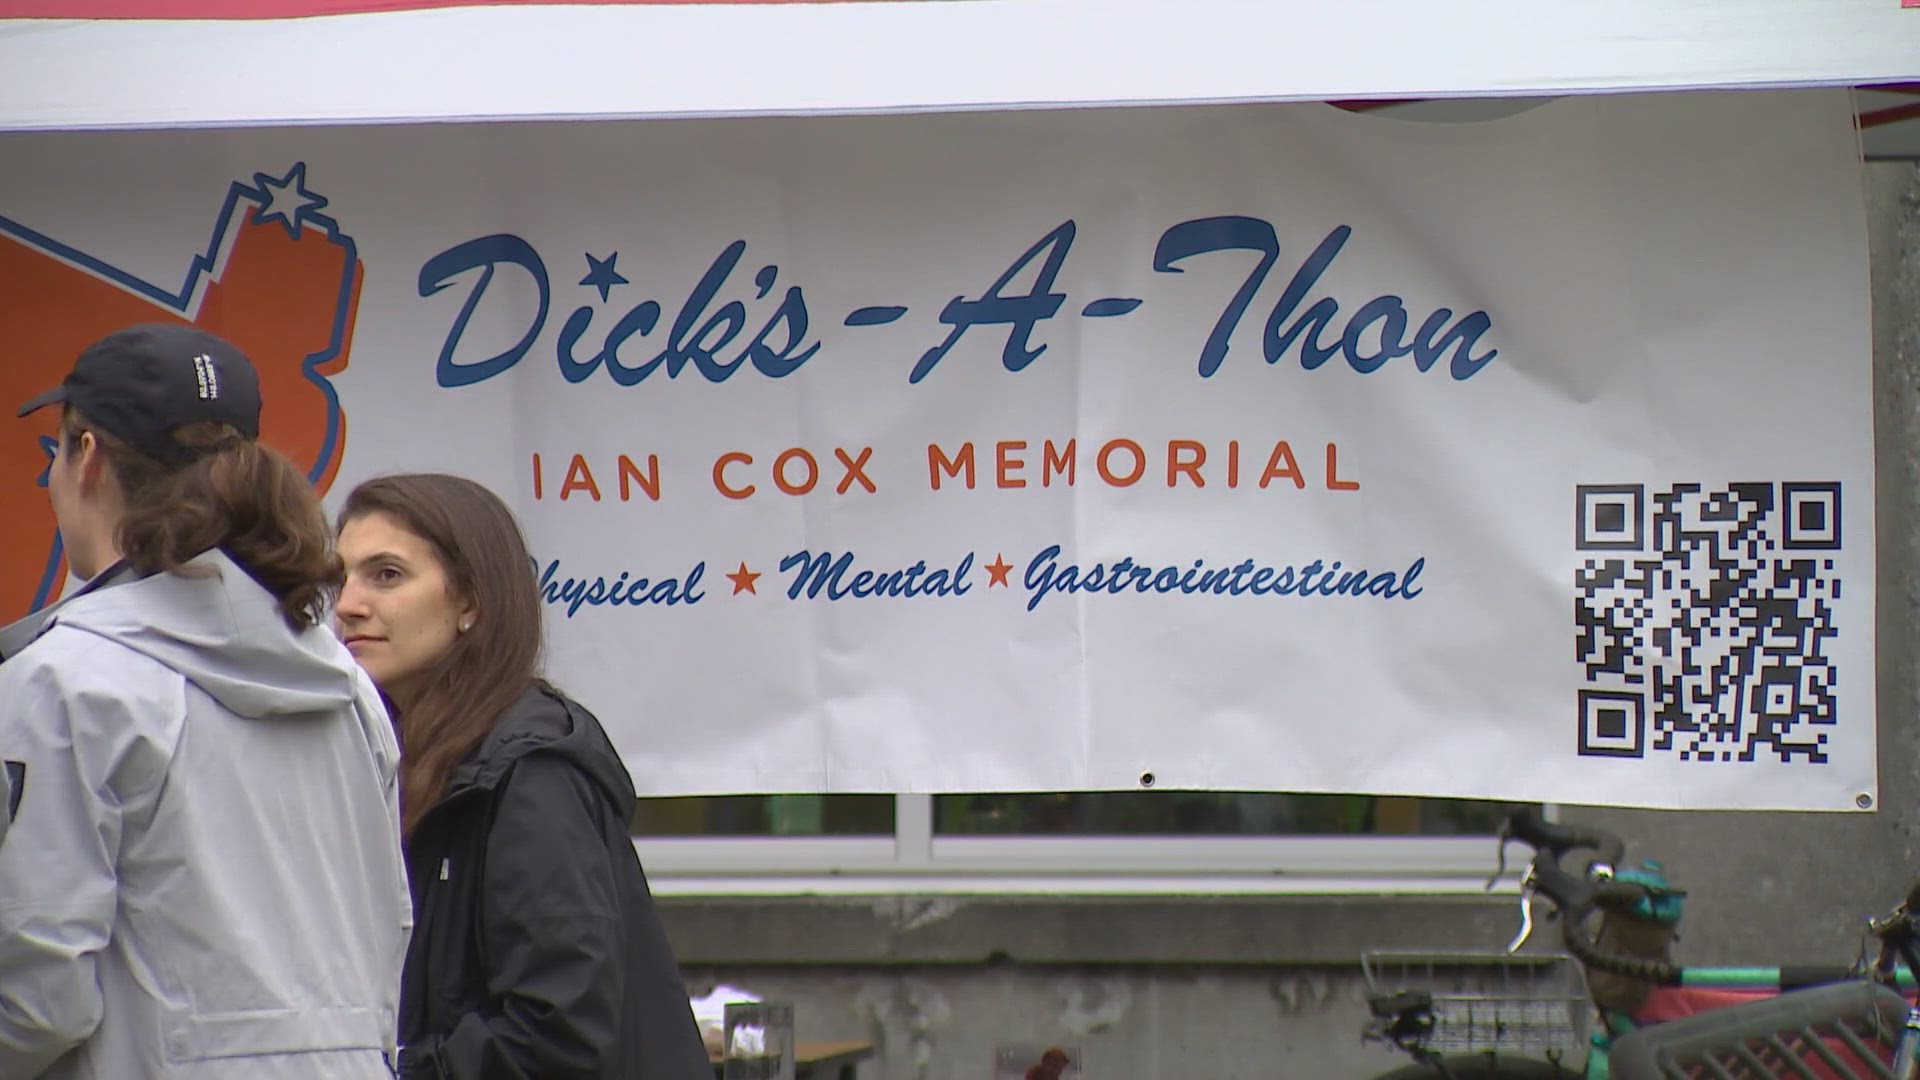 The event honors Ian Cox, who died on a hike in 2022. More than 260 people signed up for the fundraiser and ran to various Dick's Drive-In locations in Seattle.